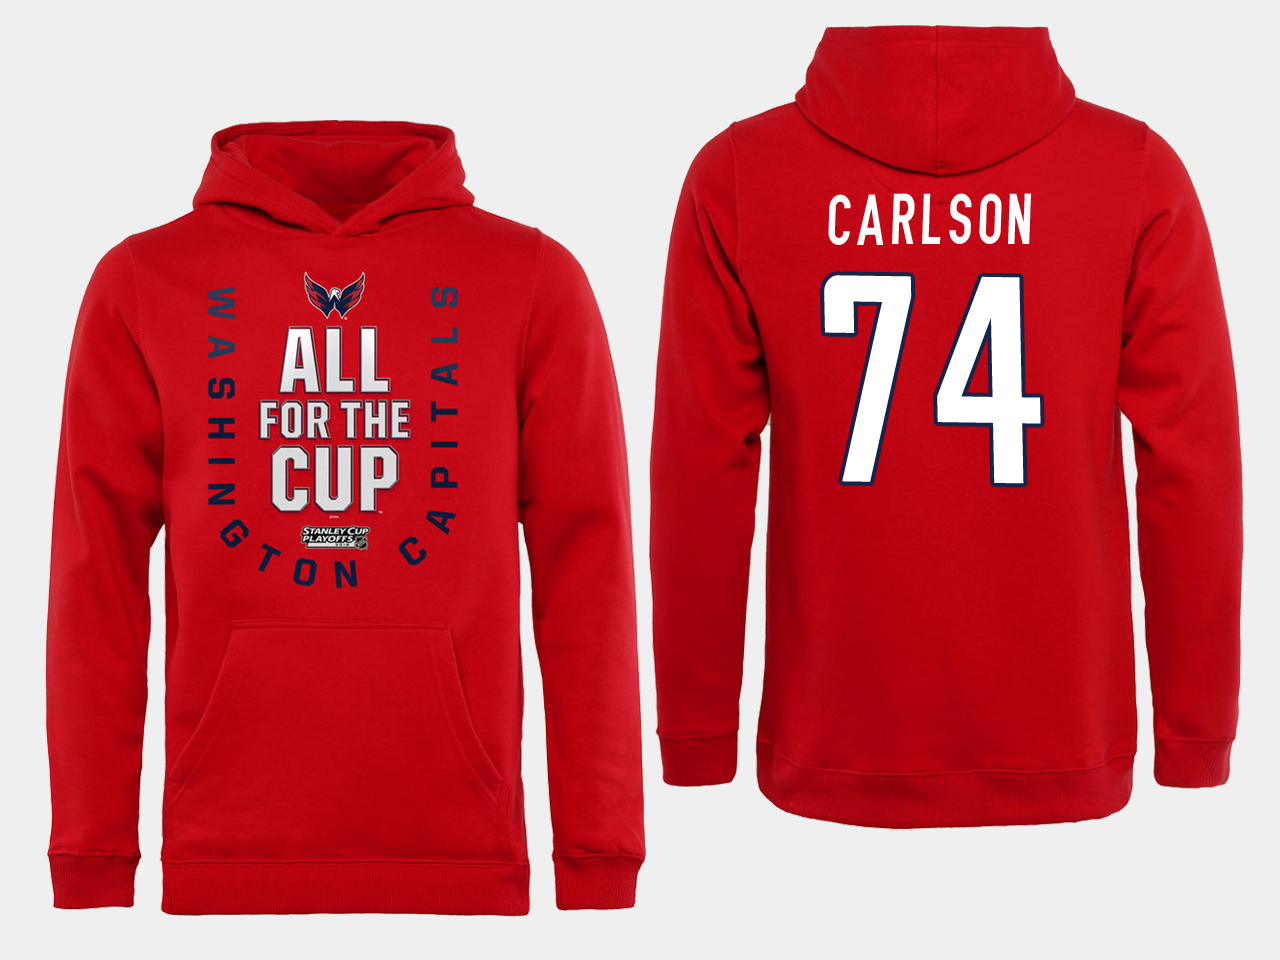 Men NHL Washington Capitals #74 Carlson Red All for the Cup Hoodie->washington capitals->NHL Jersey